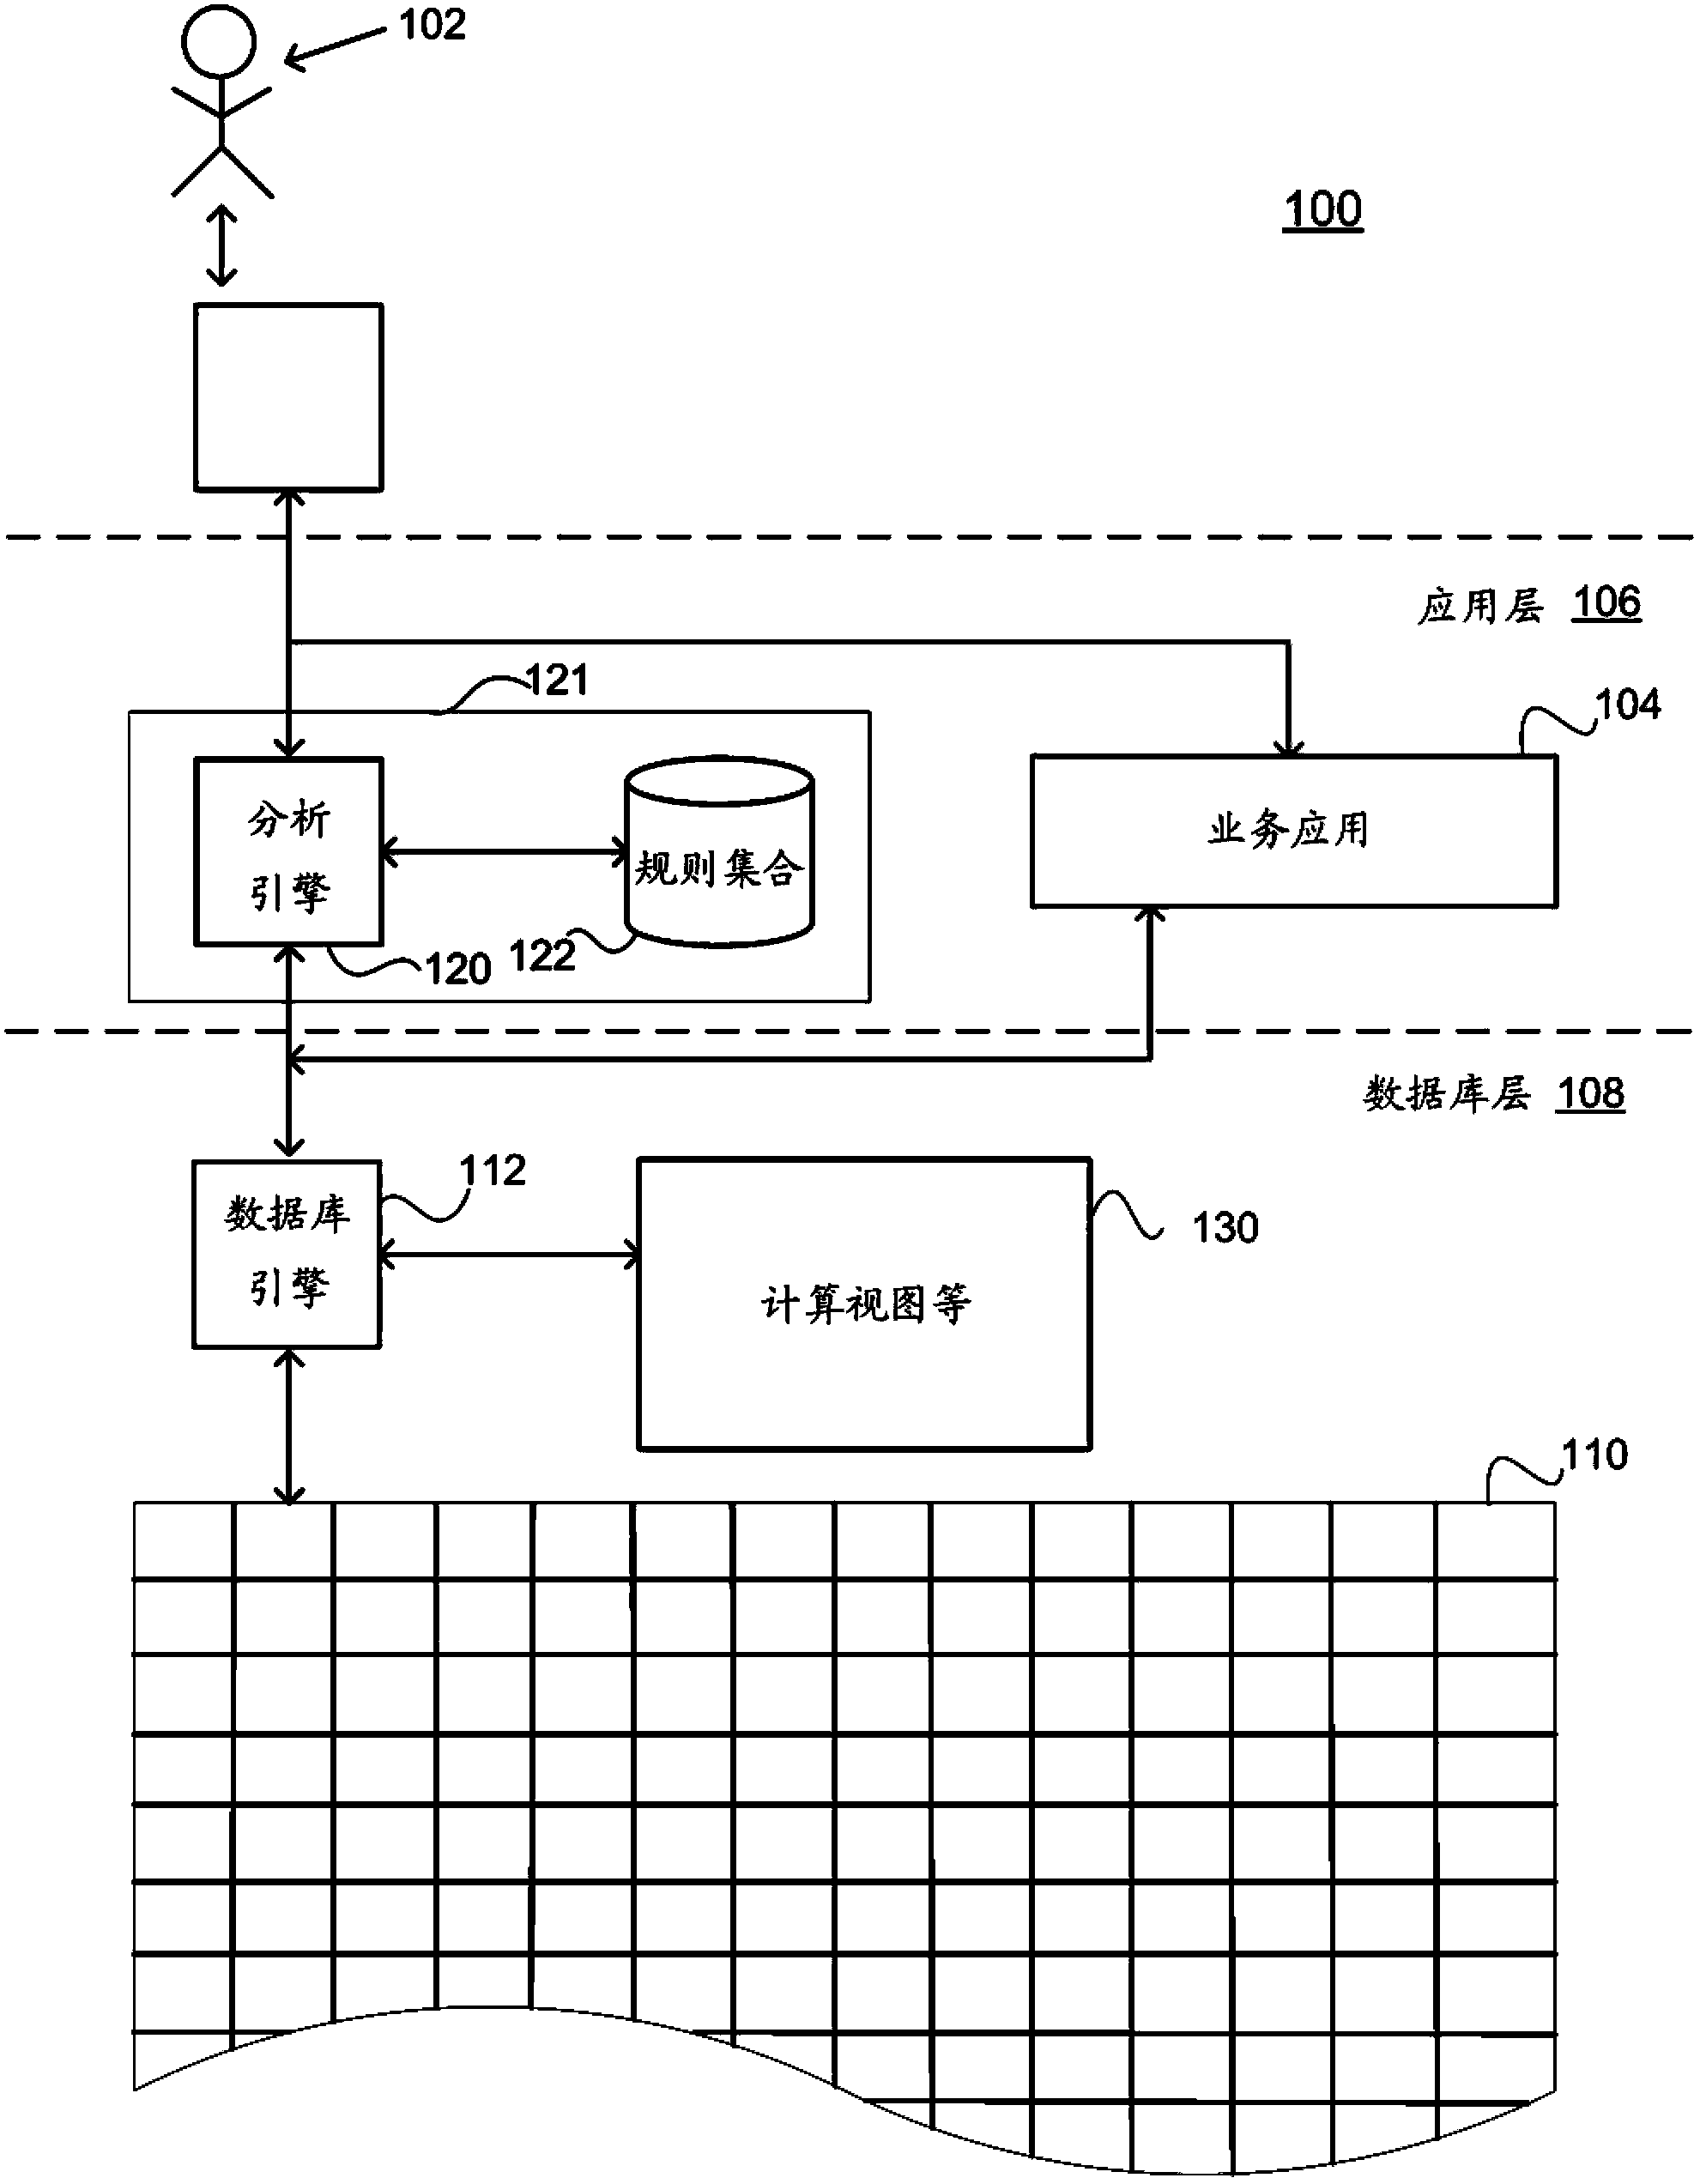 Configurable rule for monitoring data of in-memory database